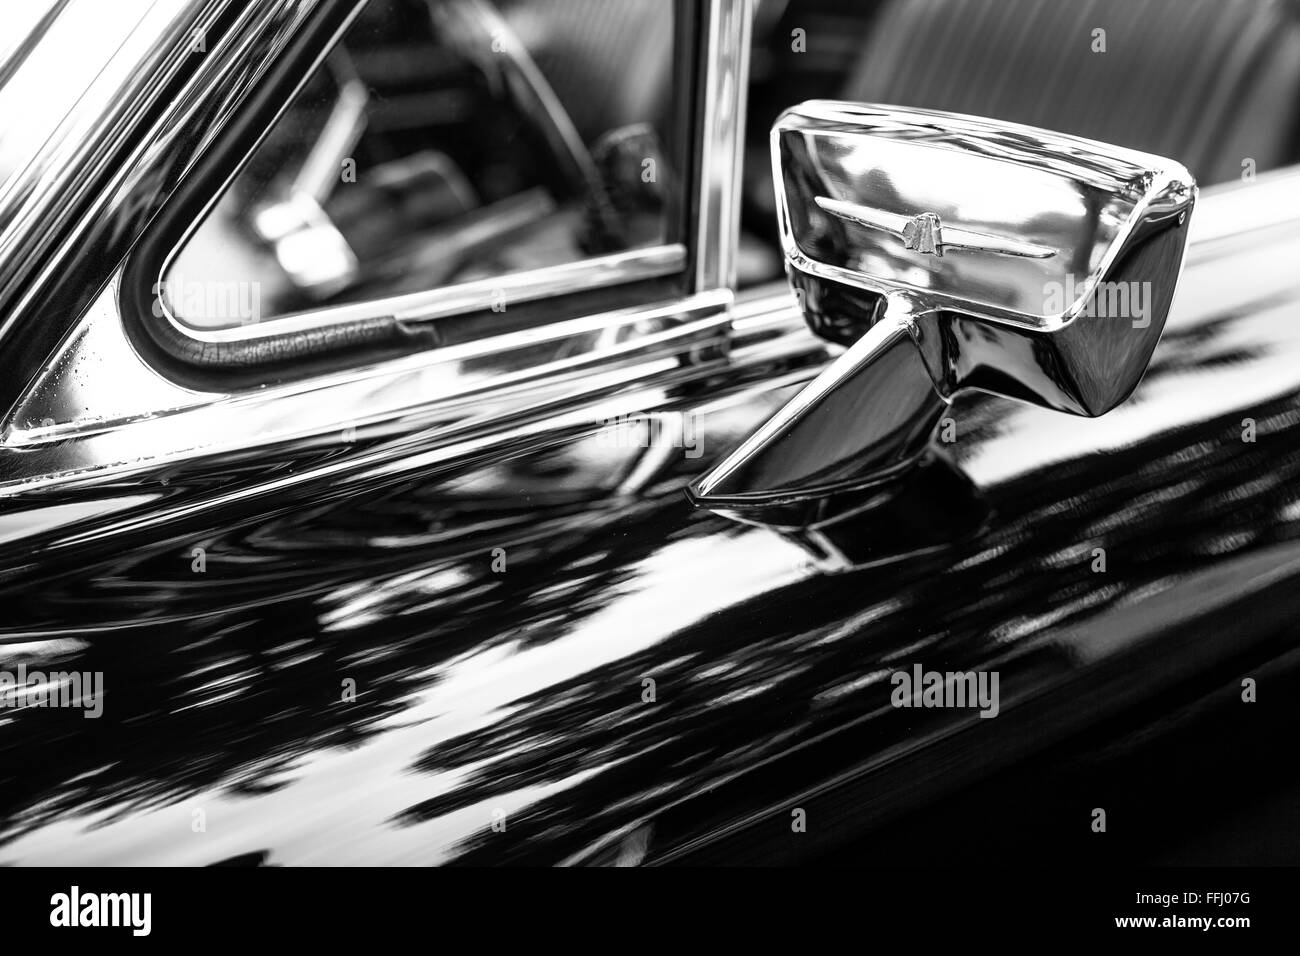 Detailed monochrome images of spectacularly restored classic cars. Stock Photo